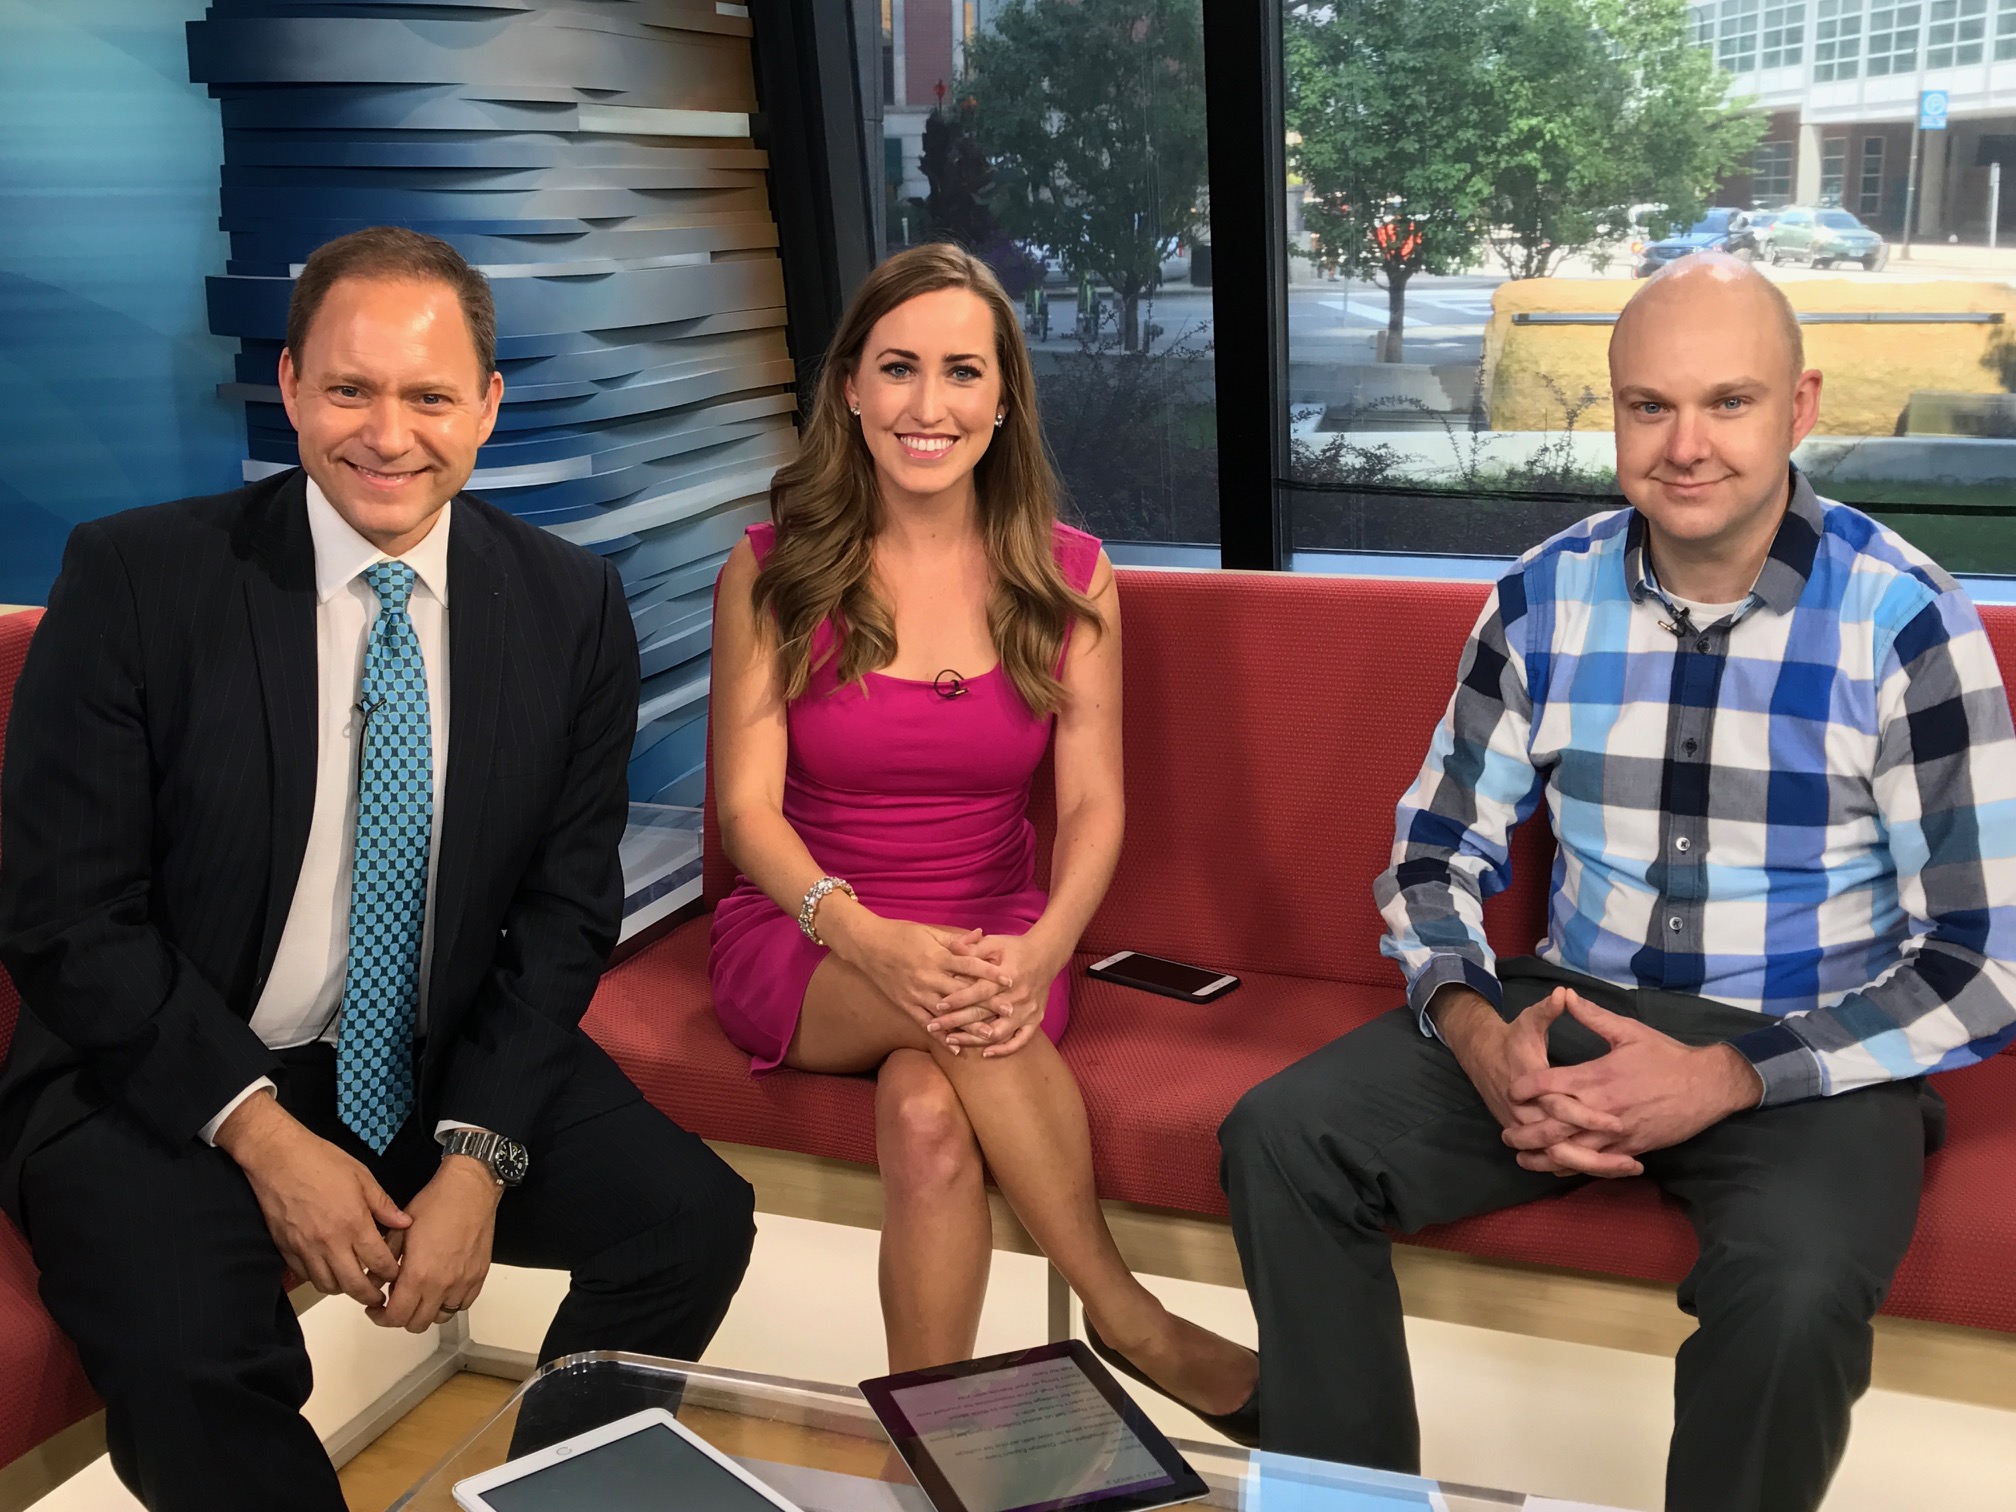 WCCO Mid-Morning with Jason DeRusha and Kylie Bearse